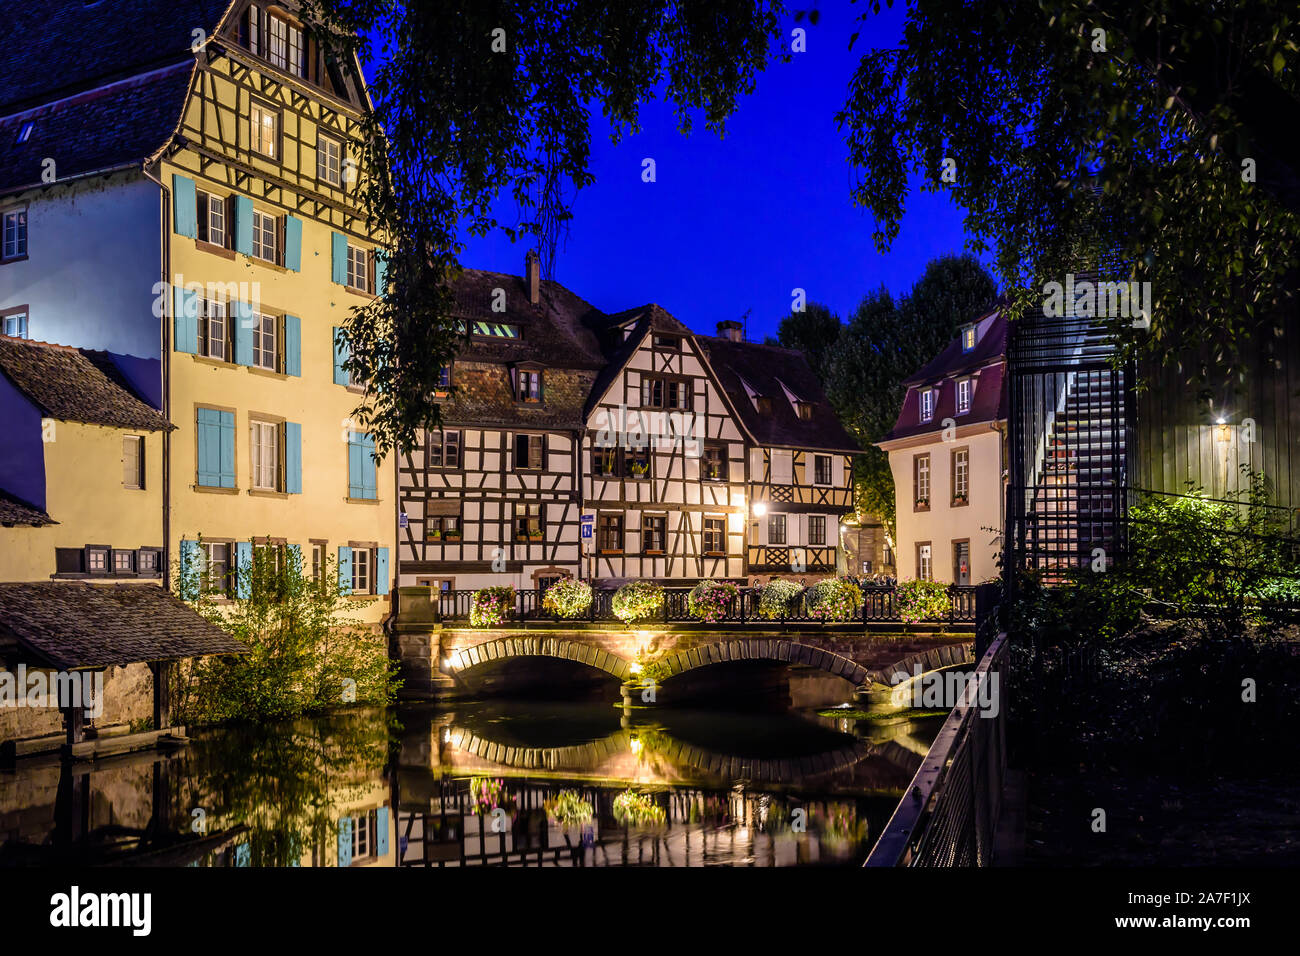 Night view of the bridge spanning the canal in the Petite France quarter in Strasbourg, France, lined by half-timbered houses reflecting in the water. Stock Photo